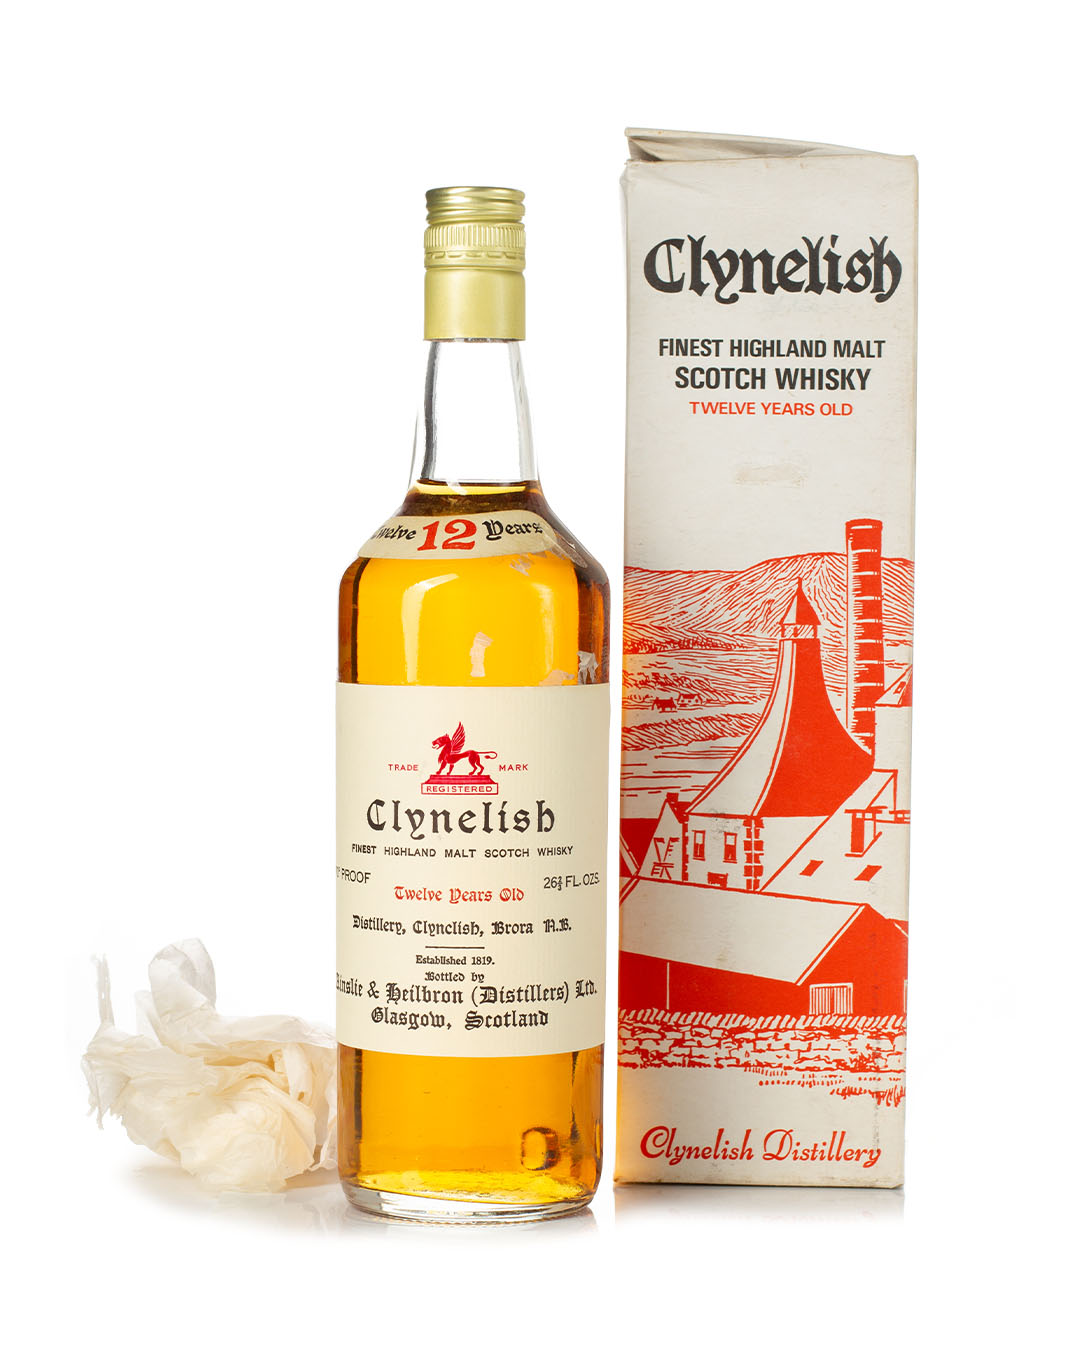 A bottle of Clynelish 12 Year Old from the 1970s